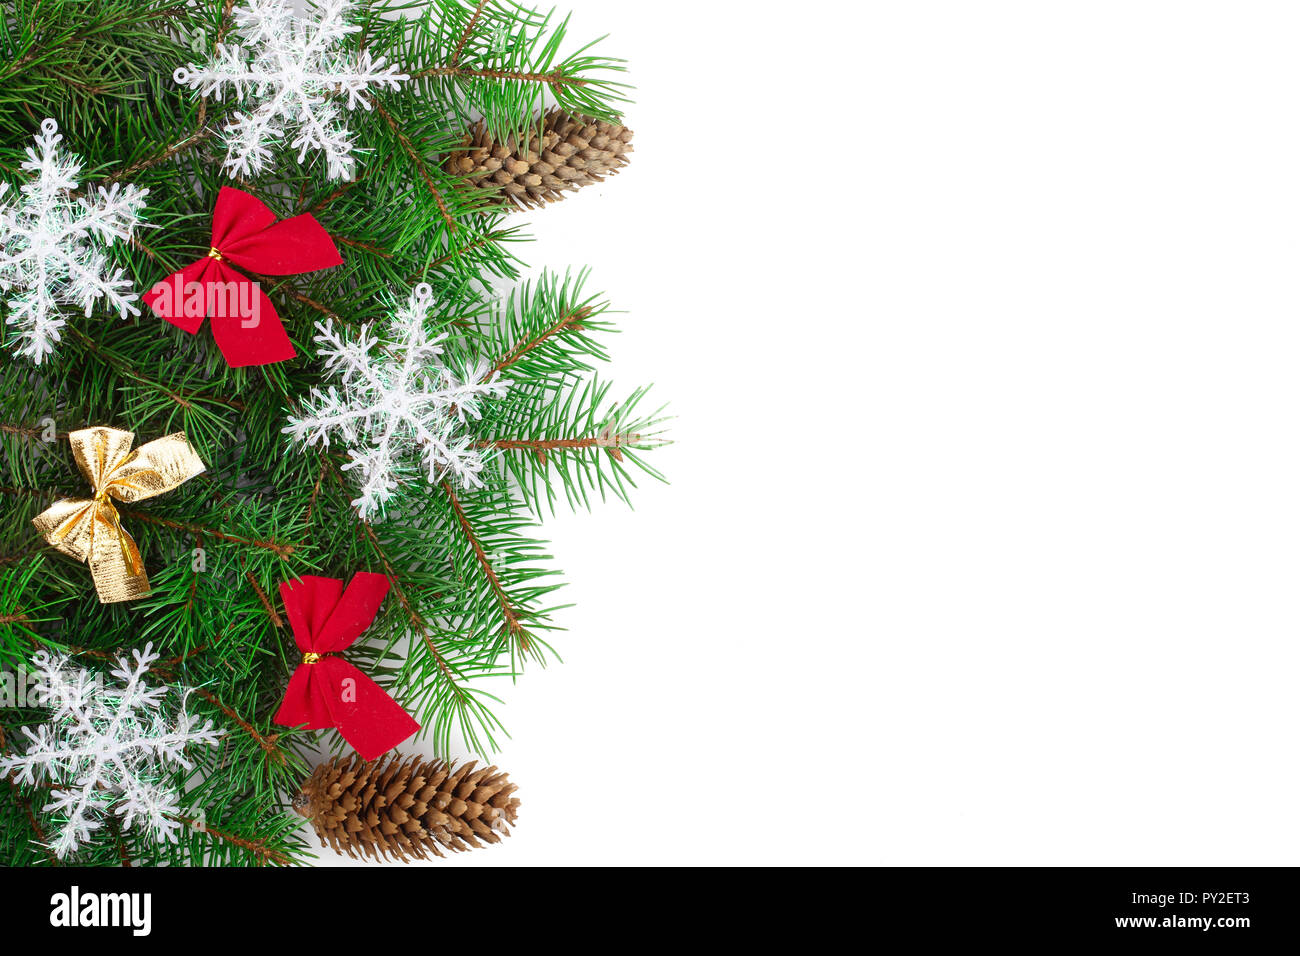 Christmas background with balls and decorations isolated on white with copy space for your text. Top view. Stock Photo